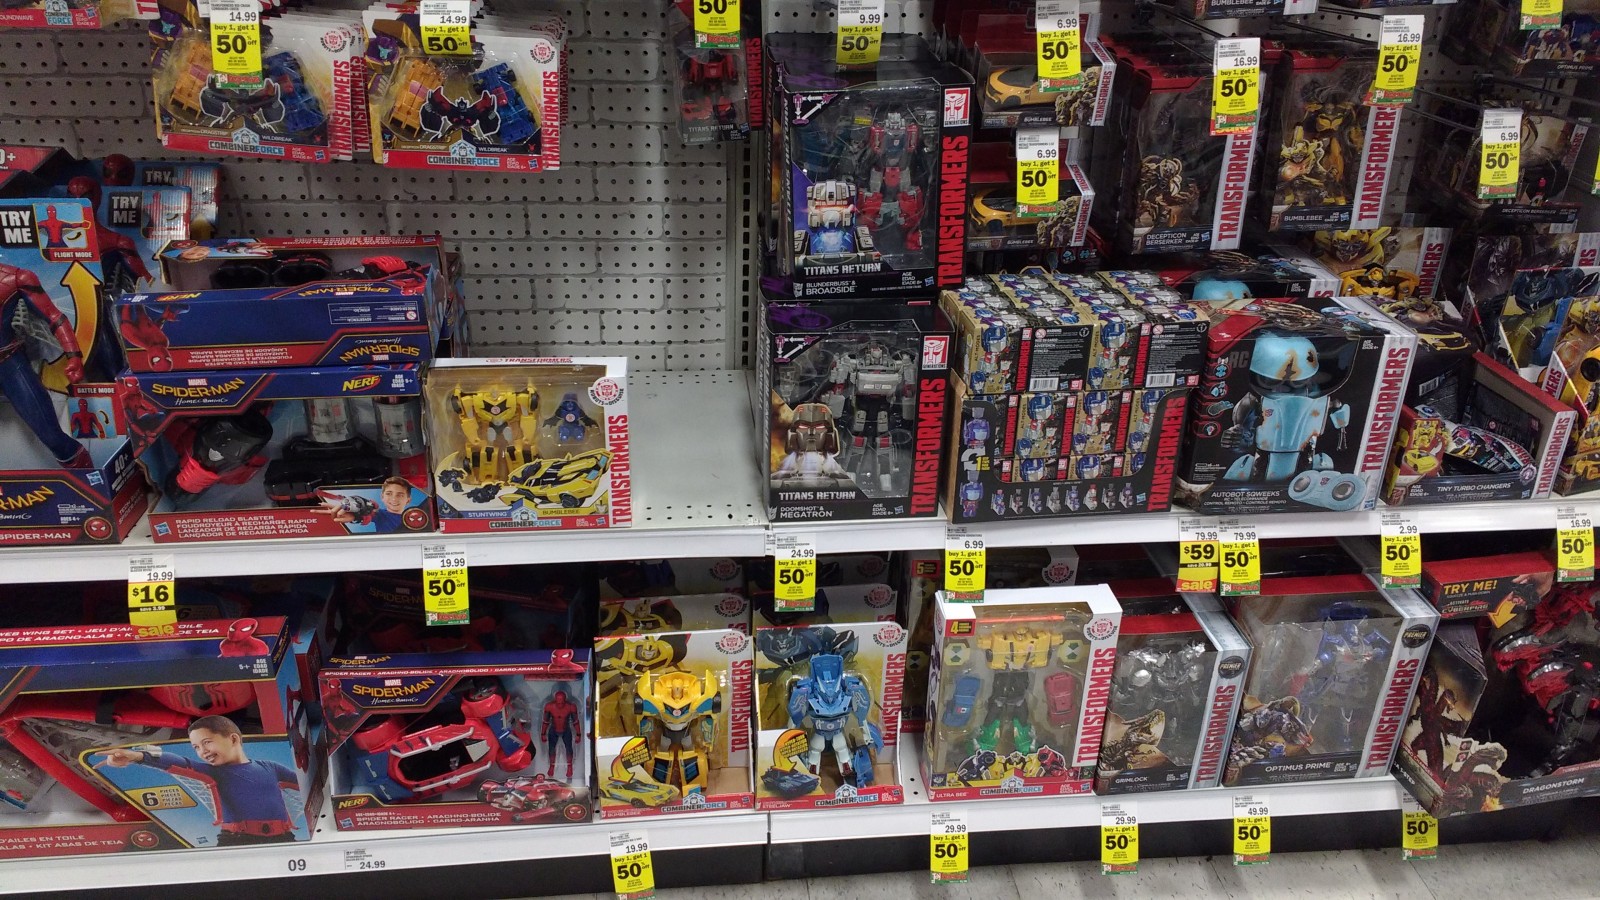 Transformers News: Meijer Holding a Buy One, Get One 50% off Deal on Transformers Nov. 12 - Nov. 18th